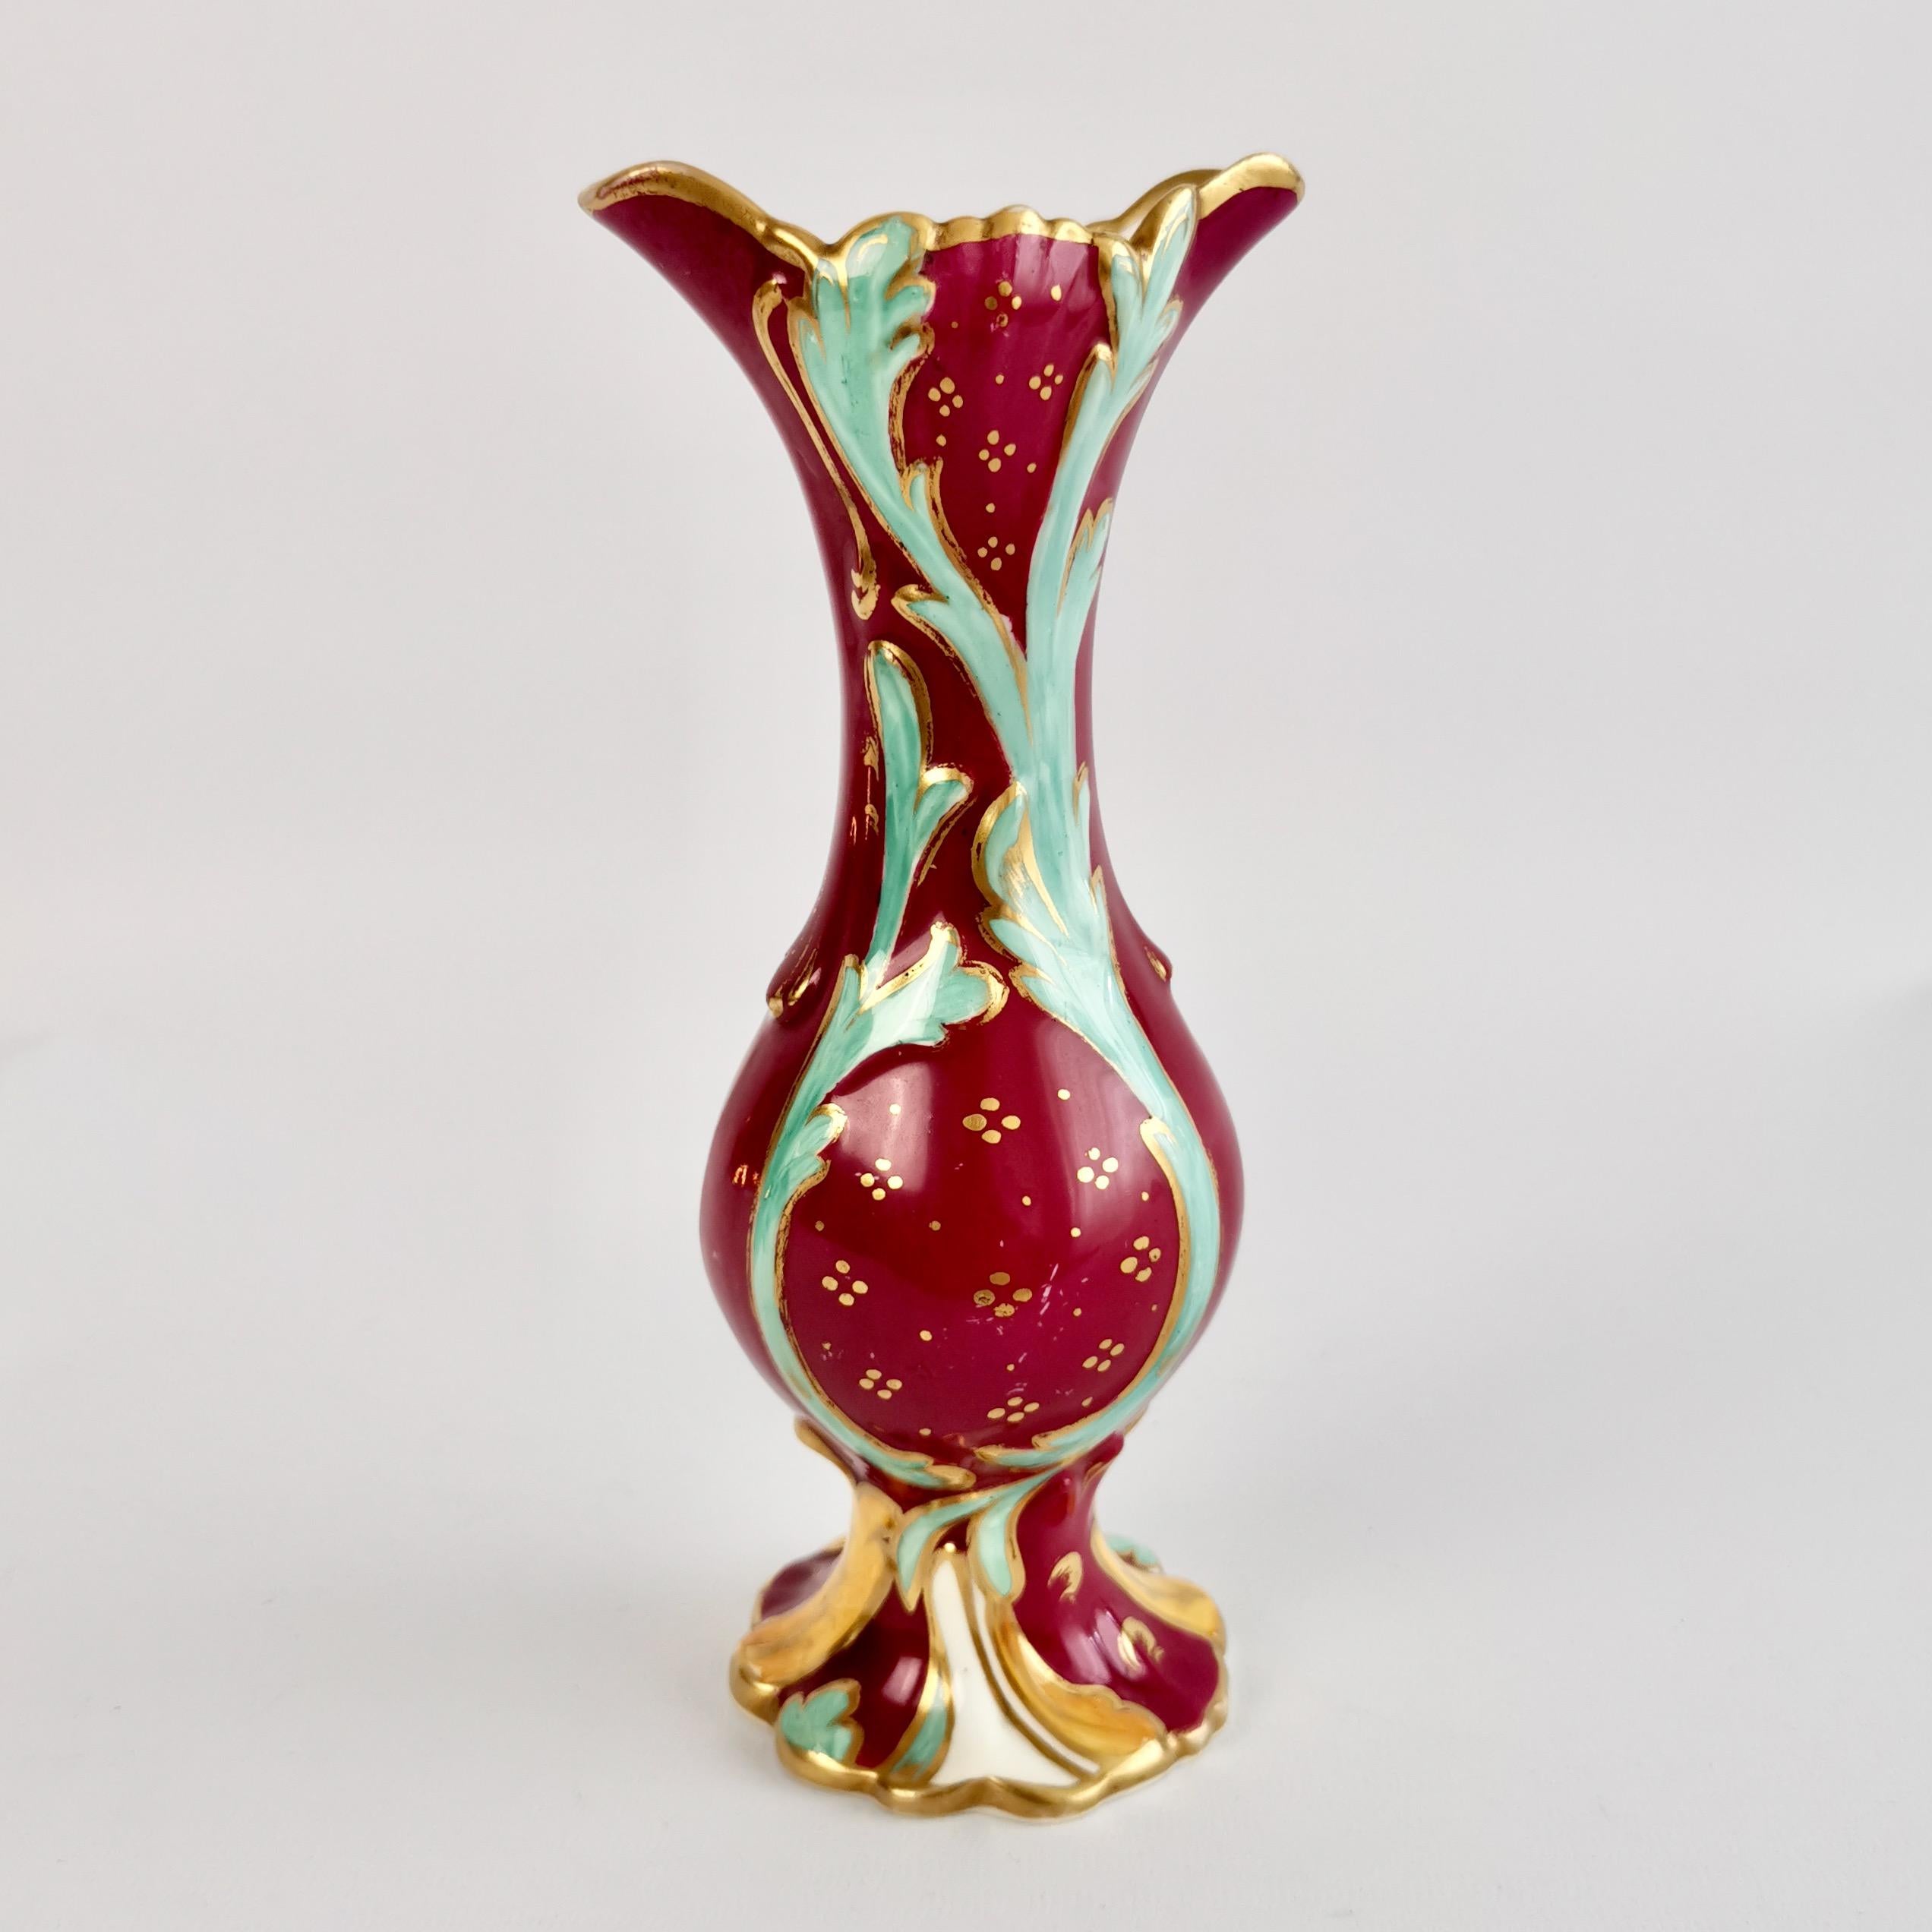 Hand-Painted Samuel Alcock Small Porcelain Vase, Maroon with Flowers, Rococo Revival